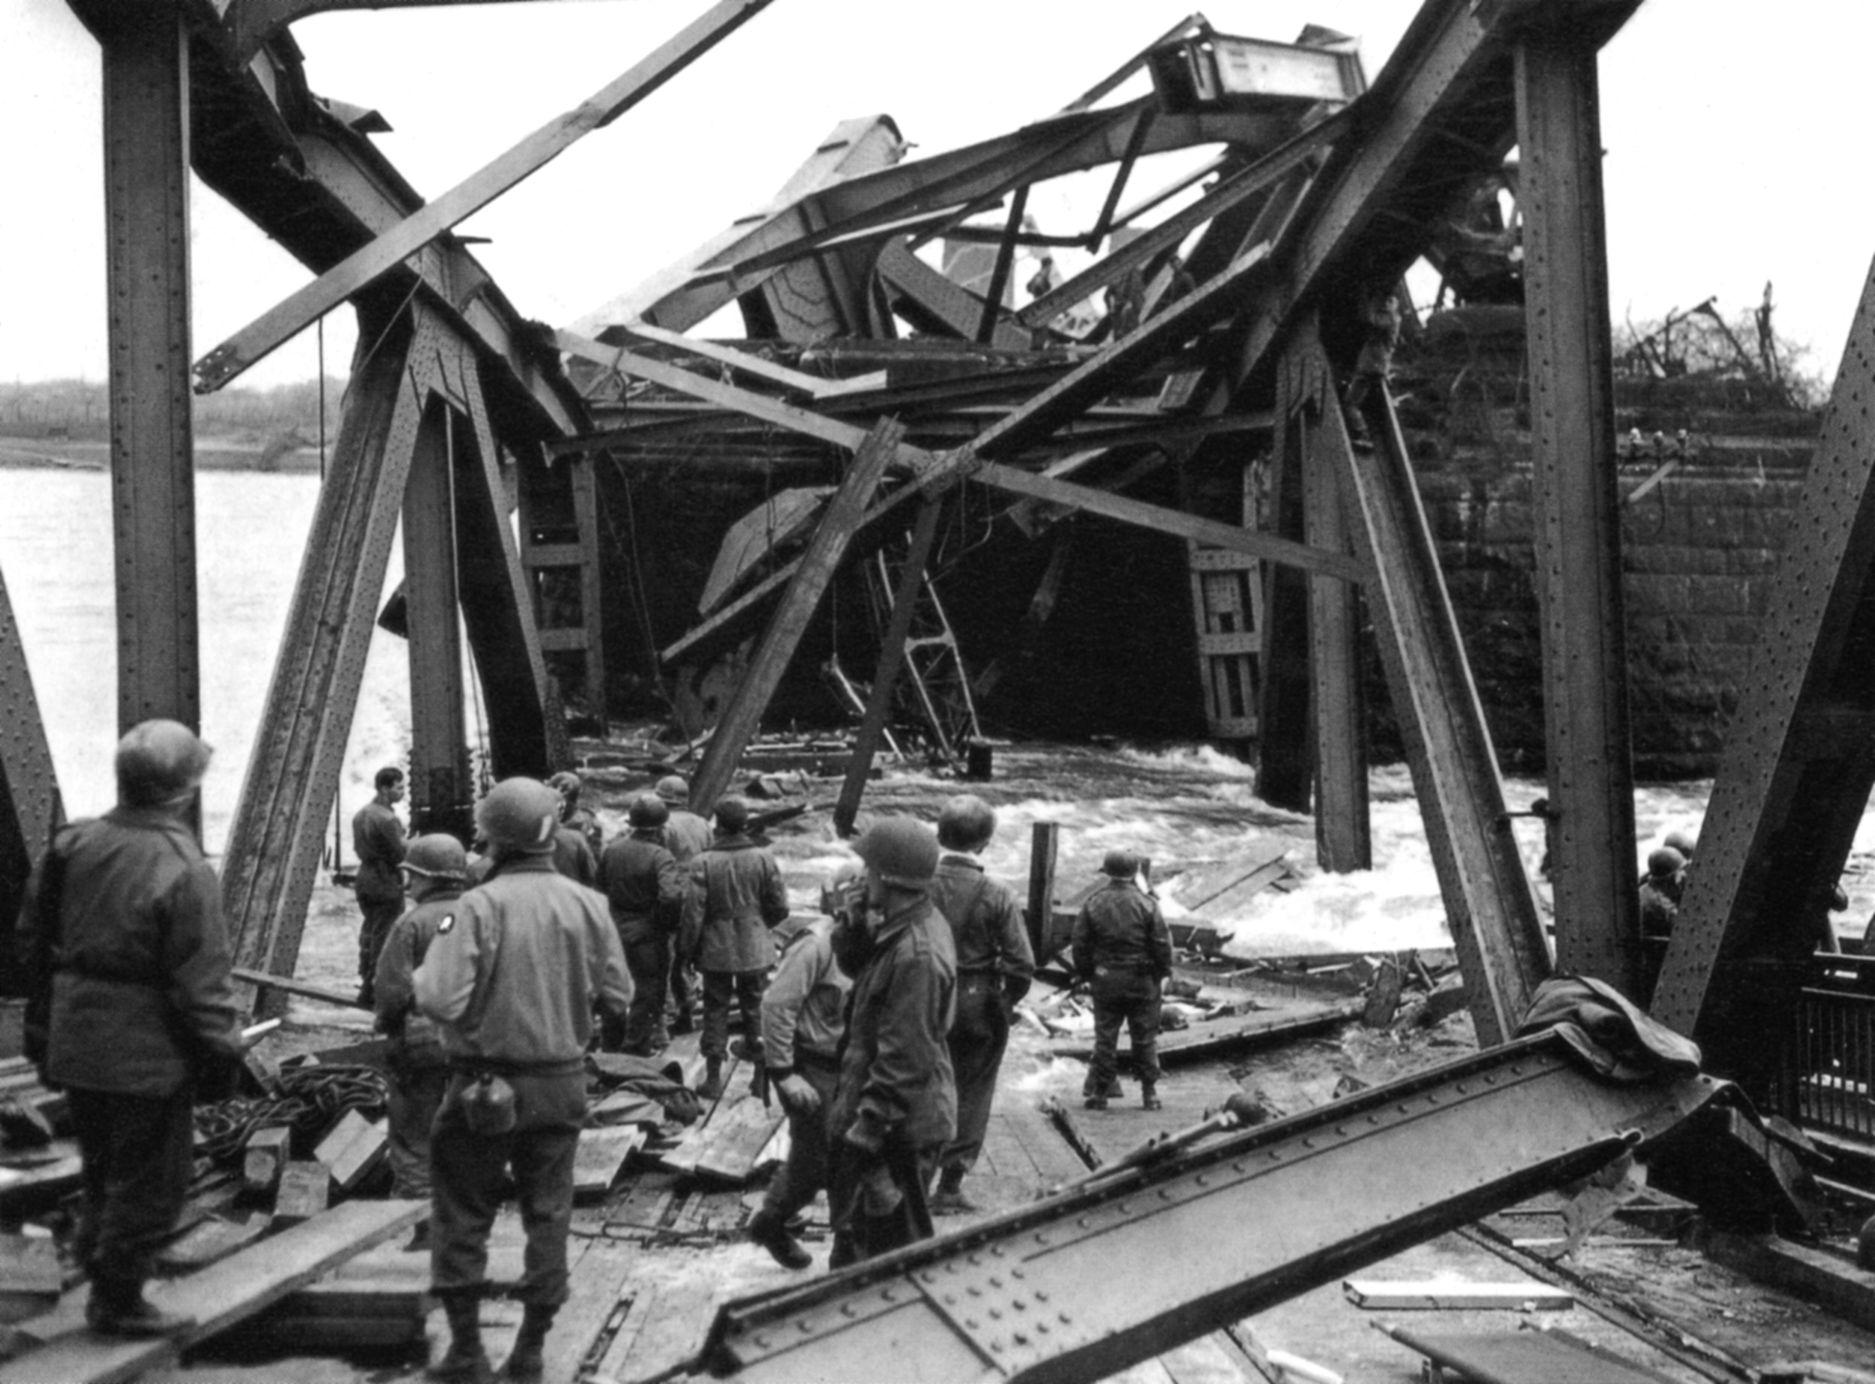 A mass of twisted steel is all that is left of the bridge when it fell into the river on March 17, killing 28 Americans.